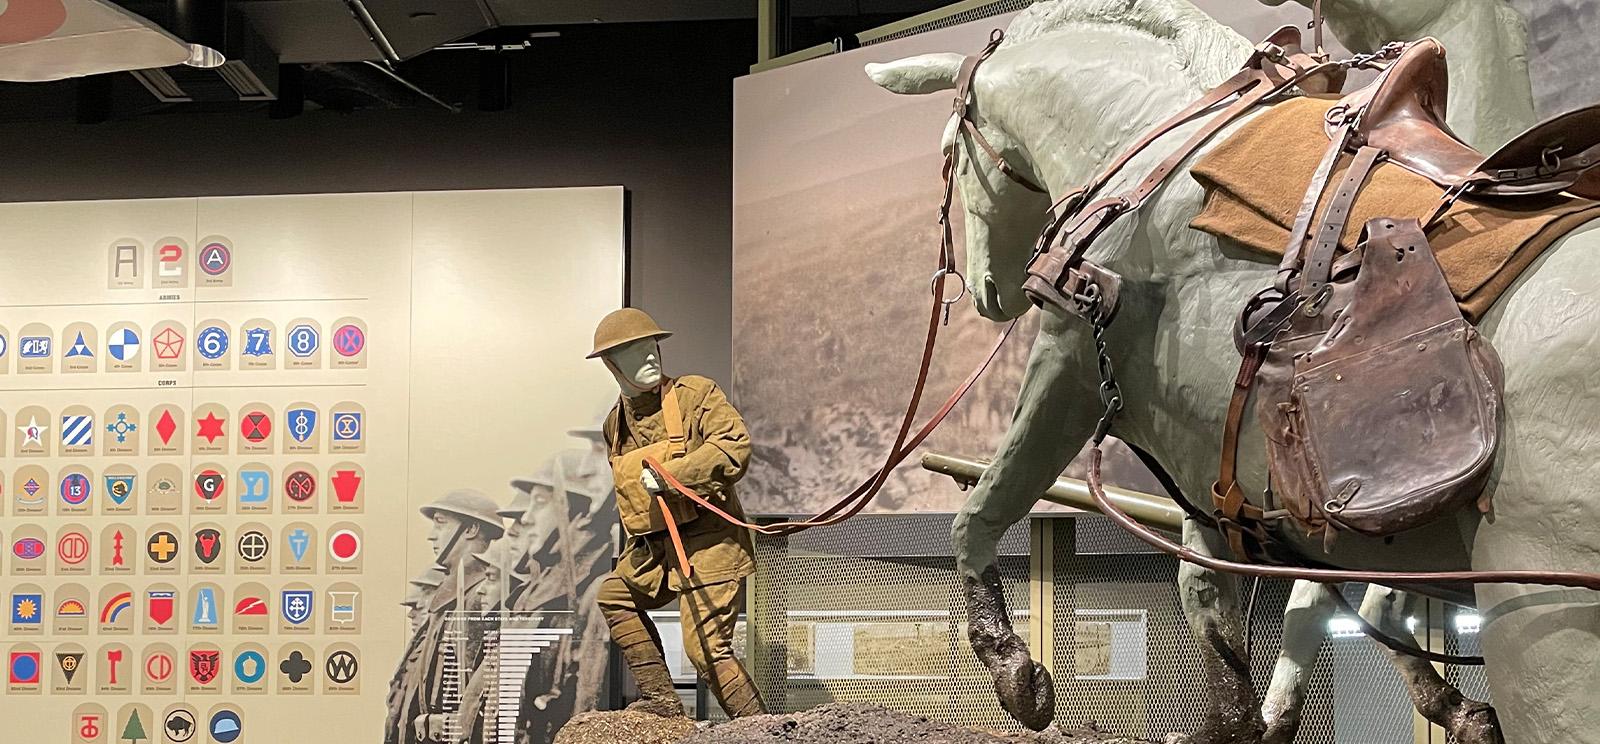 Modern photograph of a historical museum exhibit. A sculpture of a man dressed in WWI uniform struggles to lead several sculptures of mules through muddy terrain.